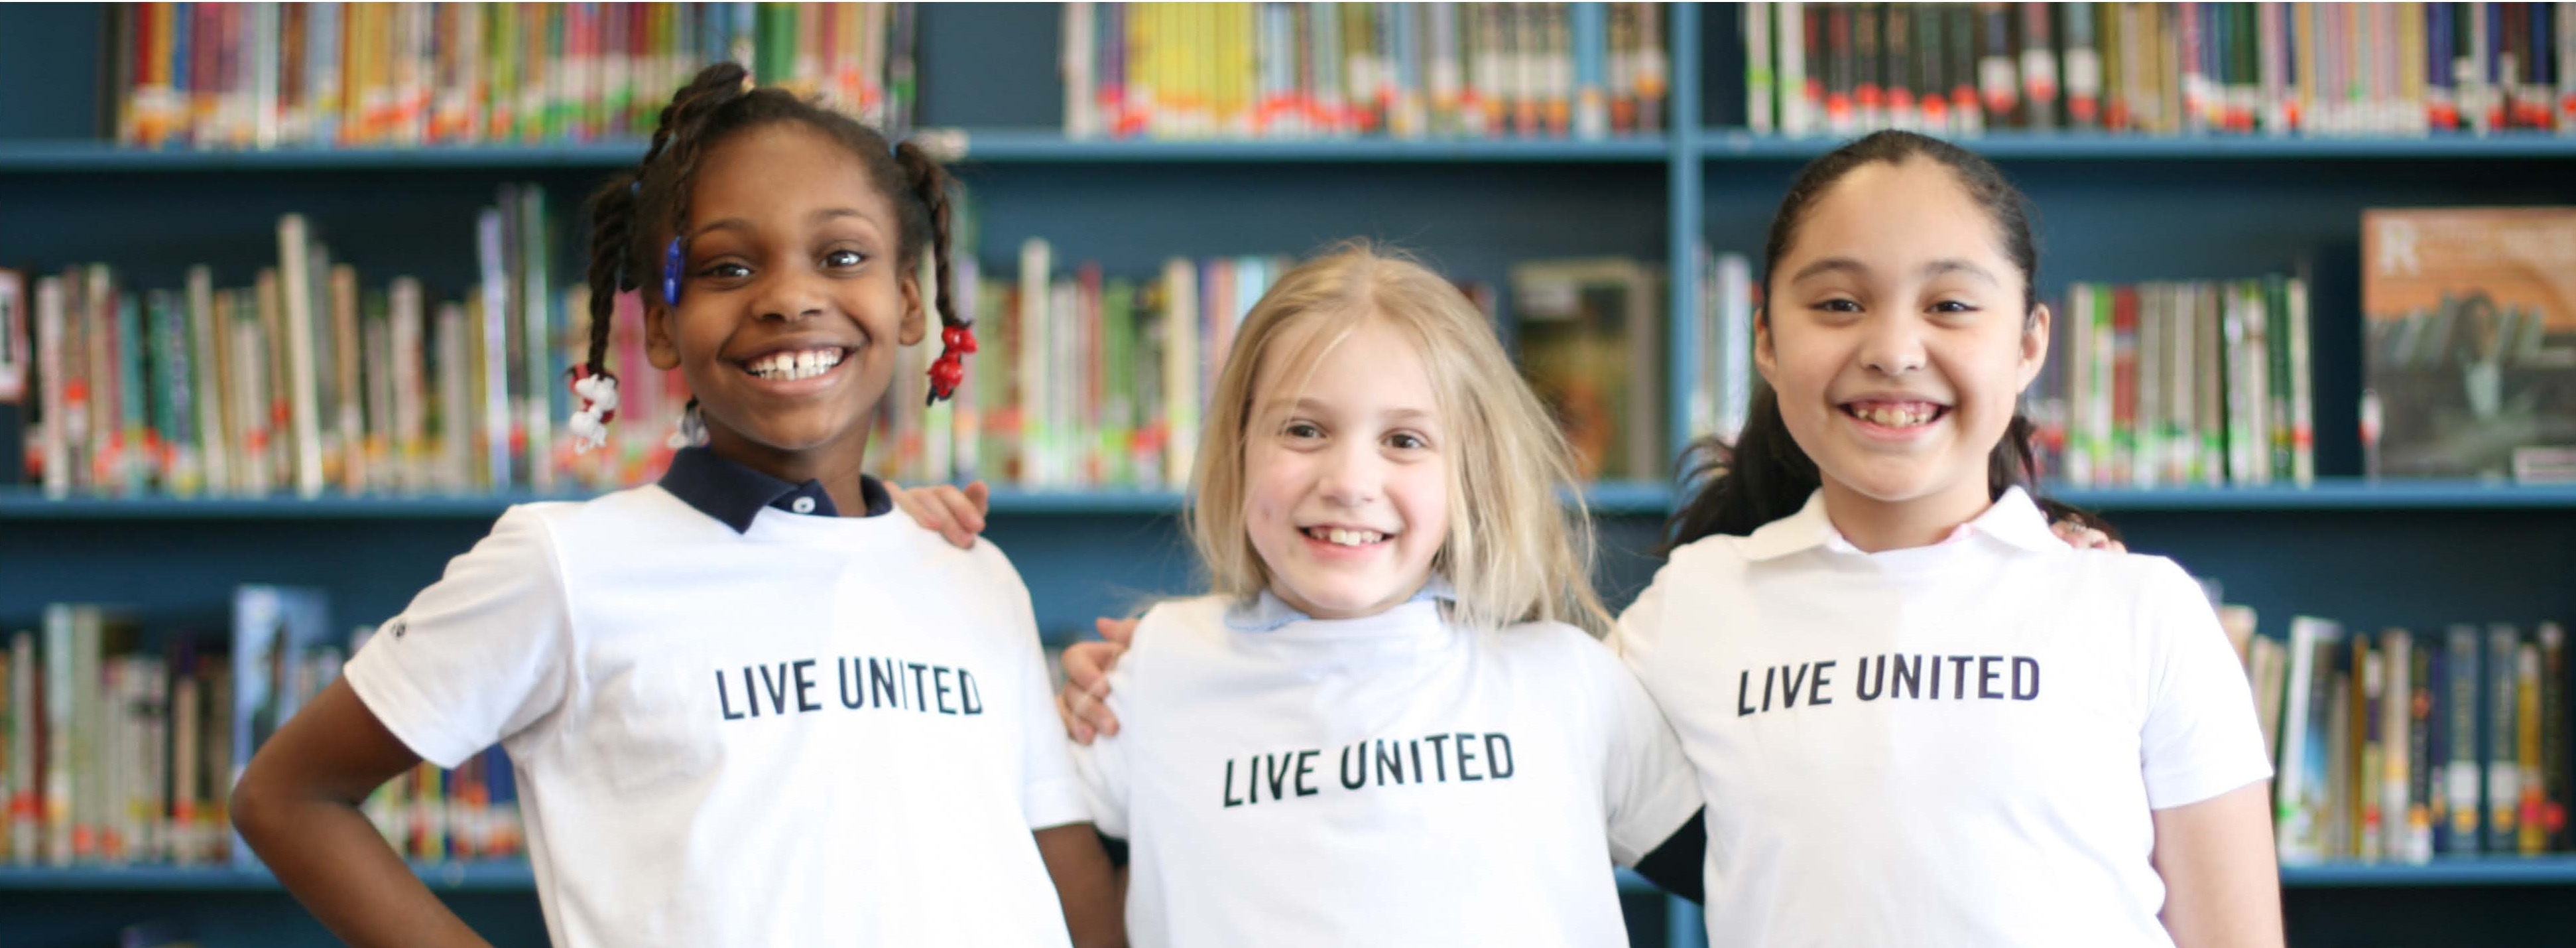 Kids standing together wearing Live United shirts